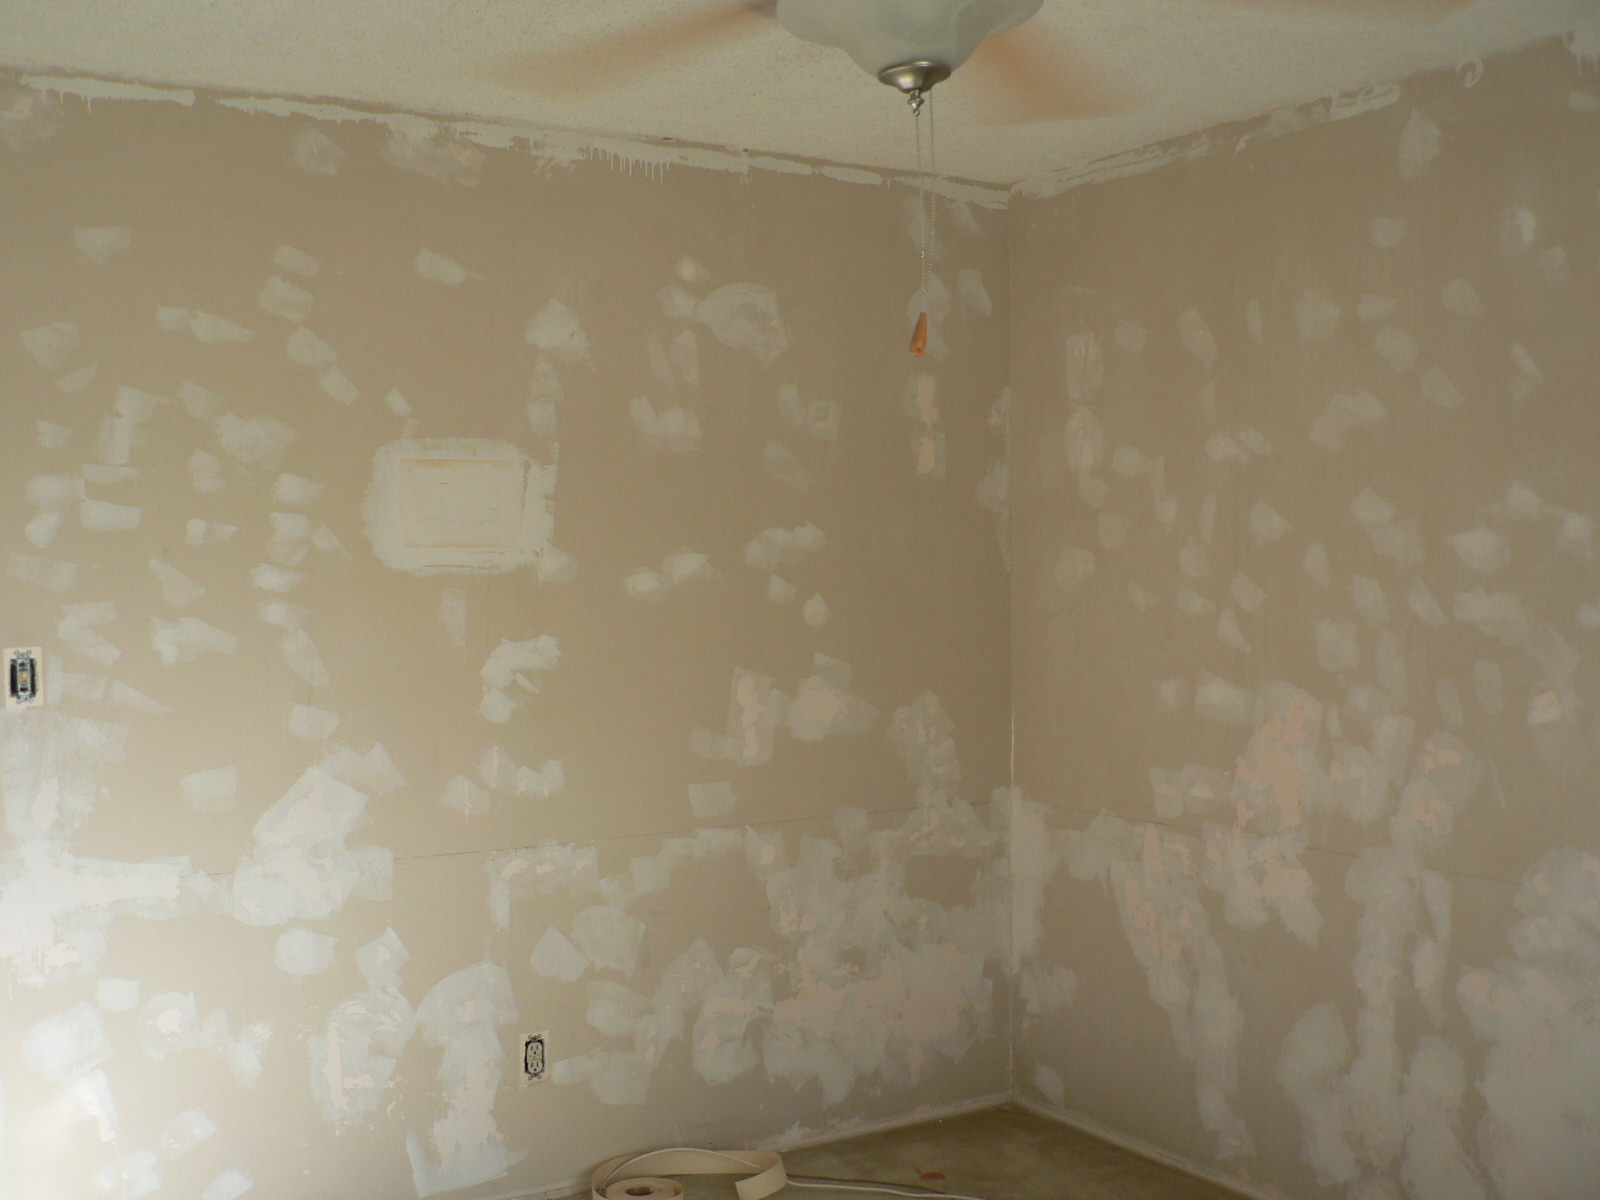 Again several days of mud and sanding I am beginning to hate drywall